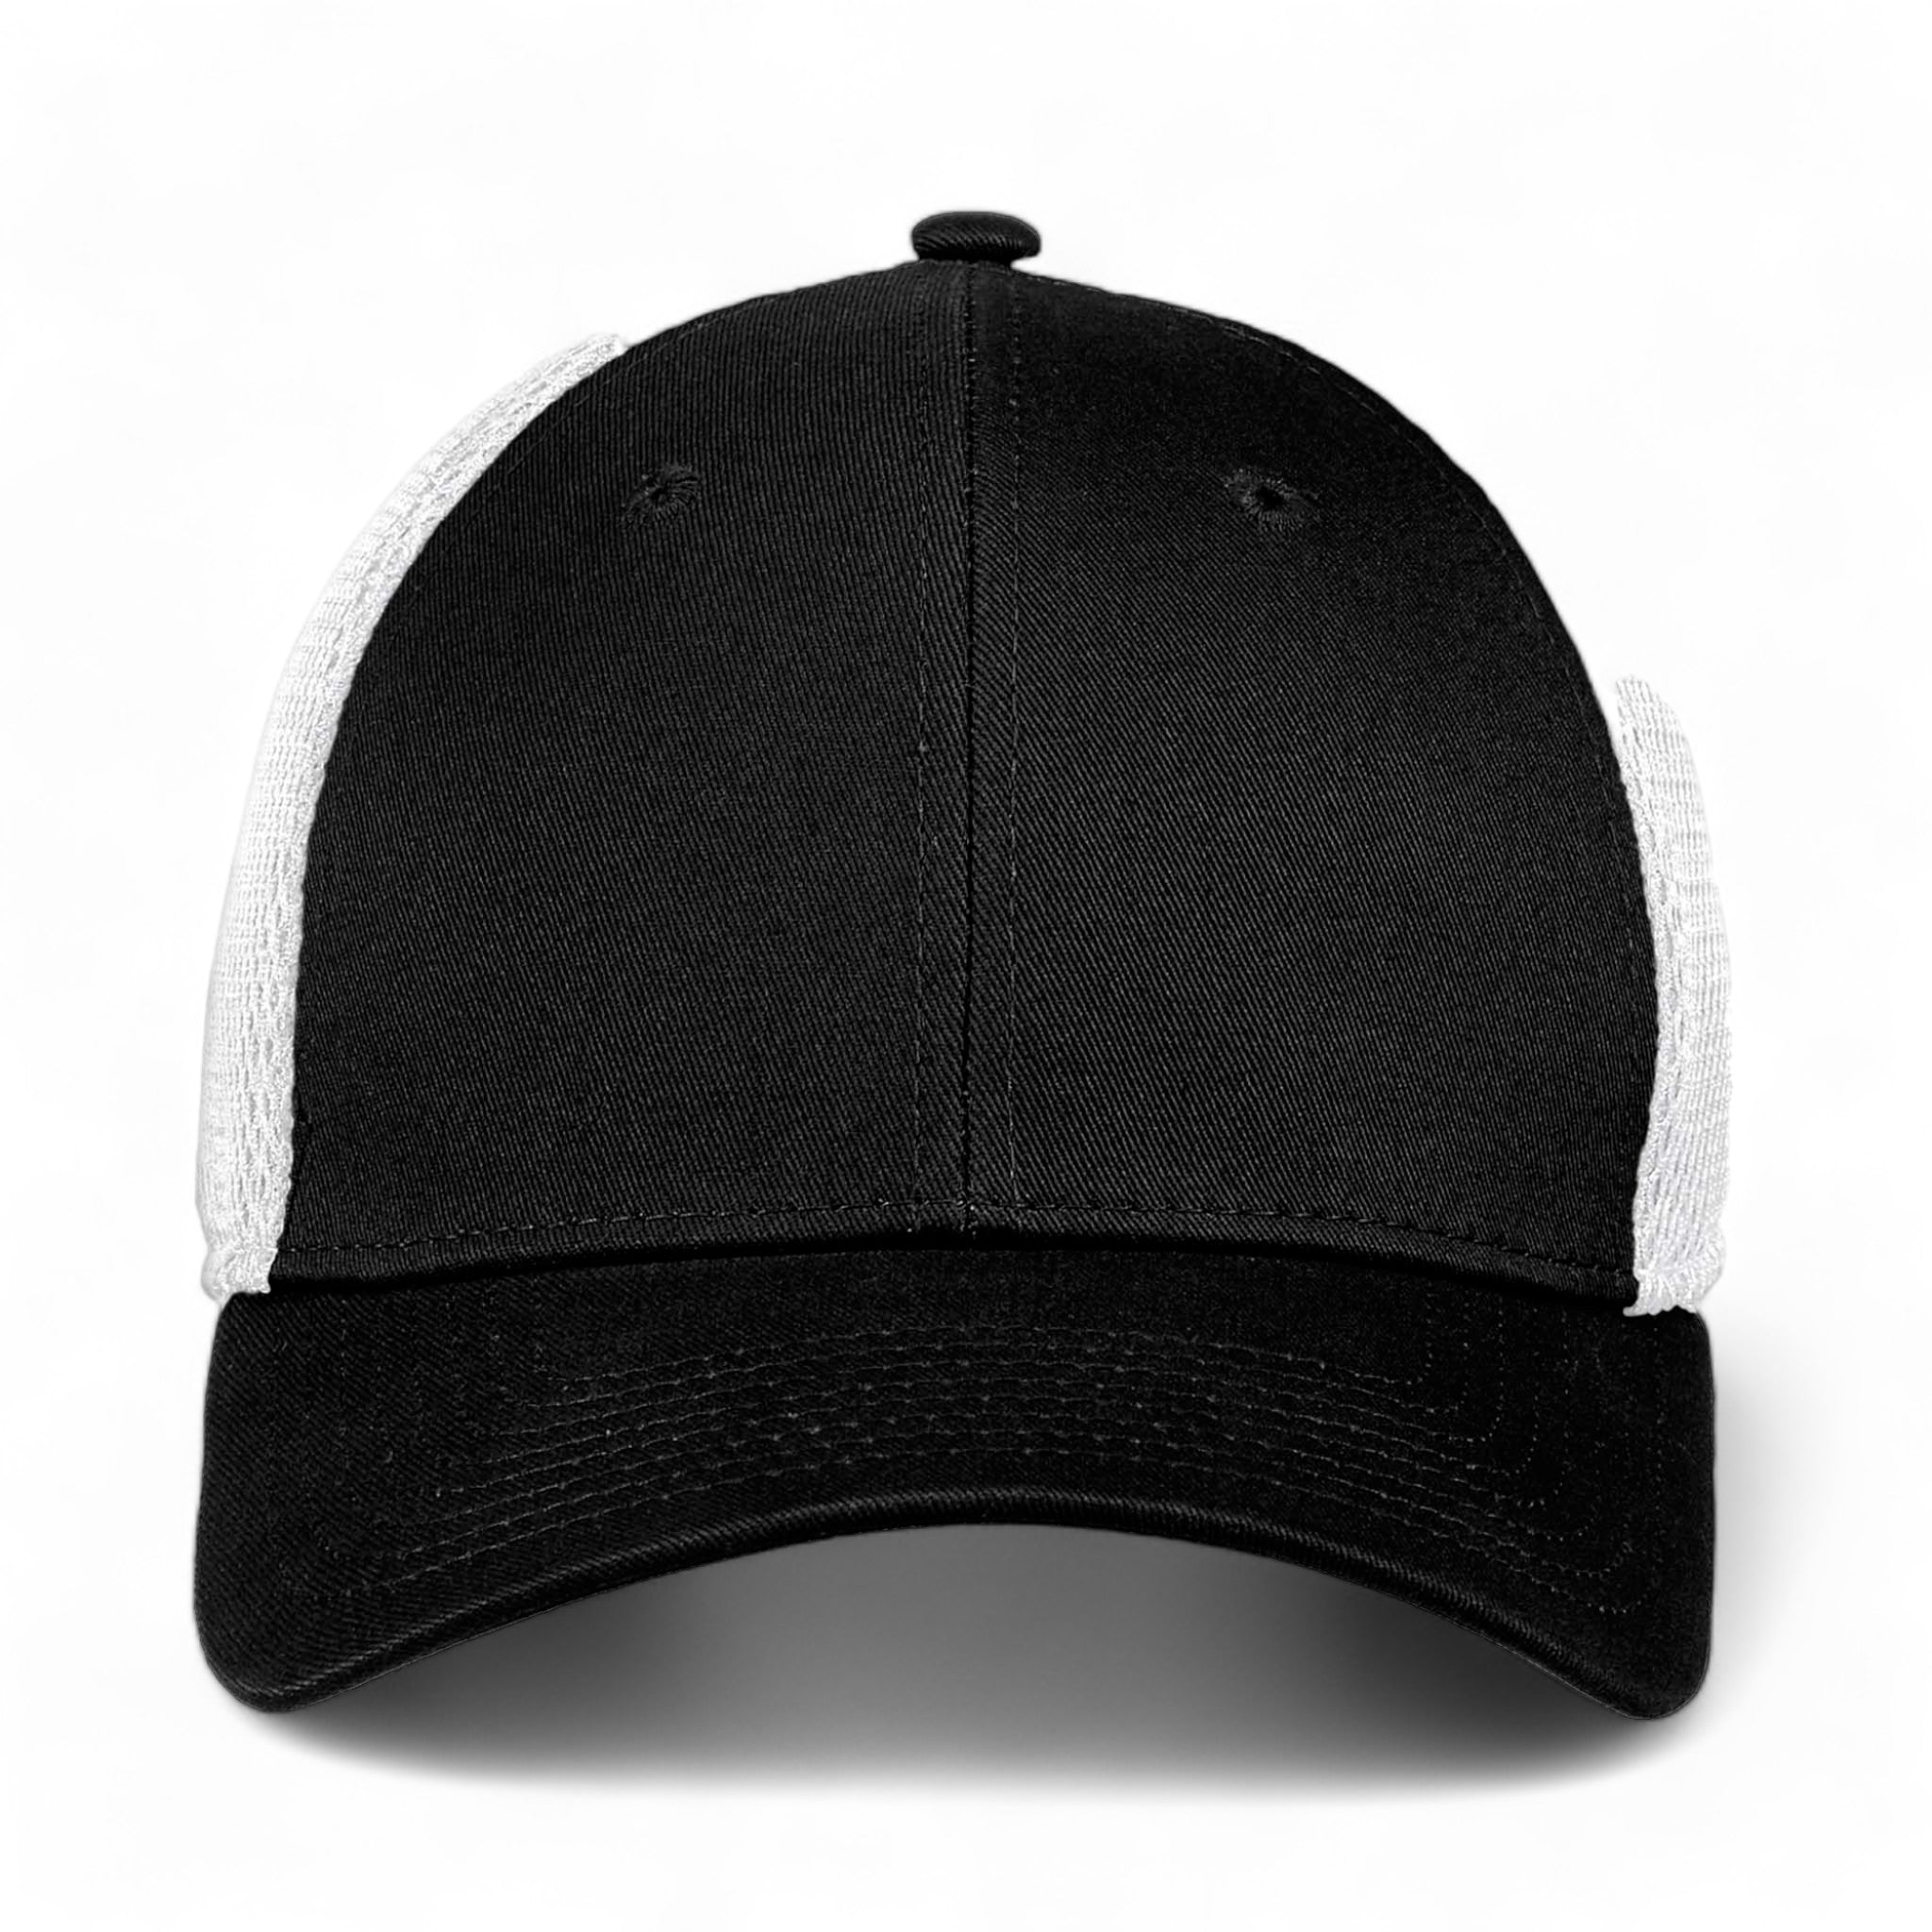 Front view of New Era NE1020 custom hat in black and white